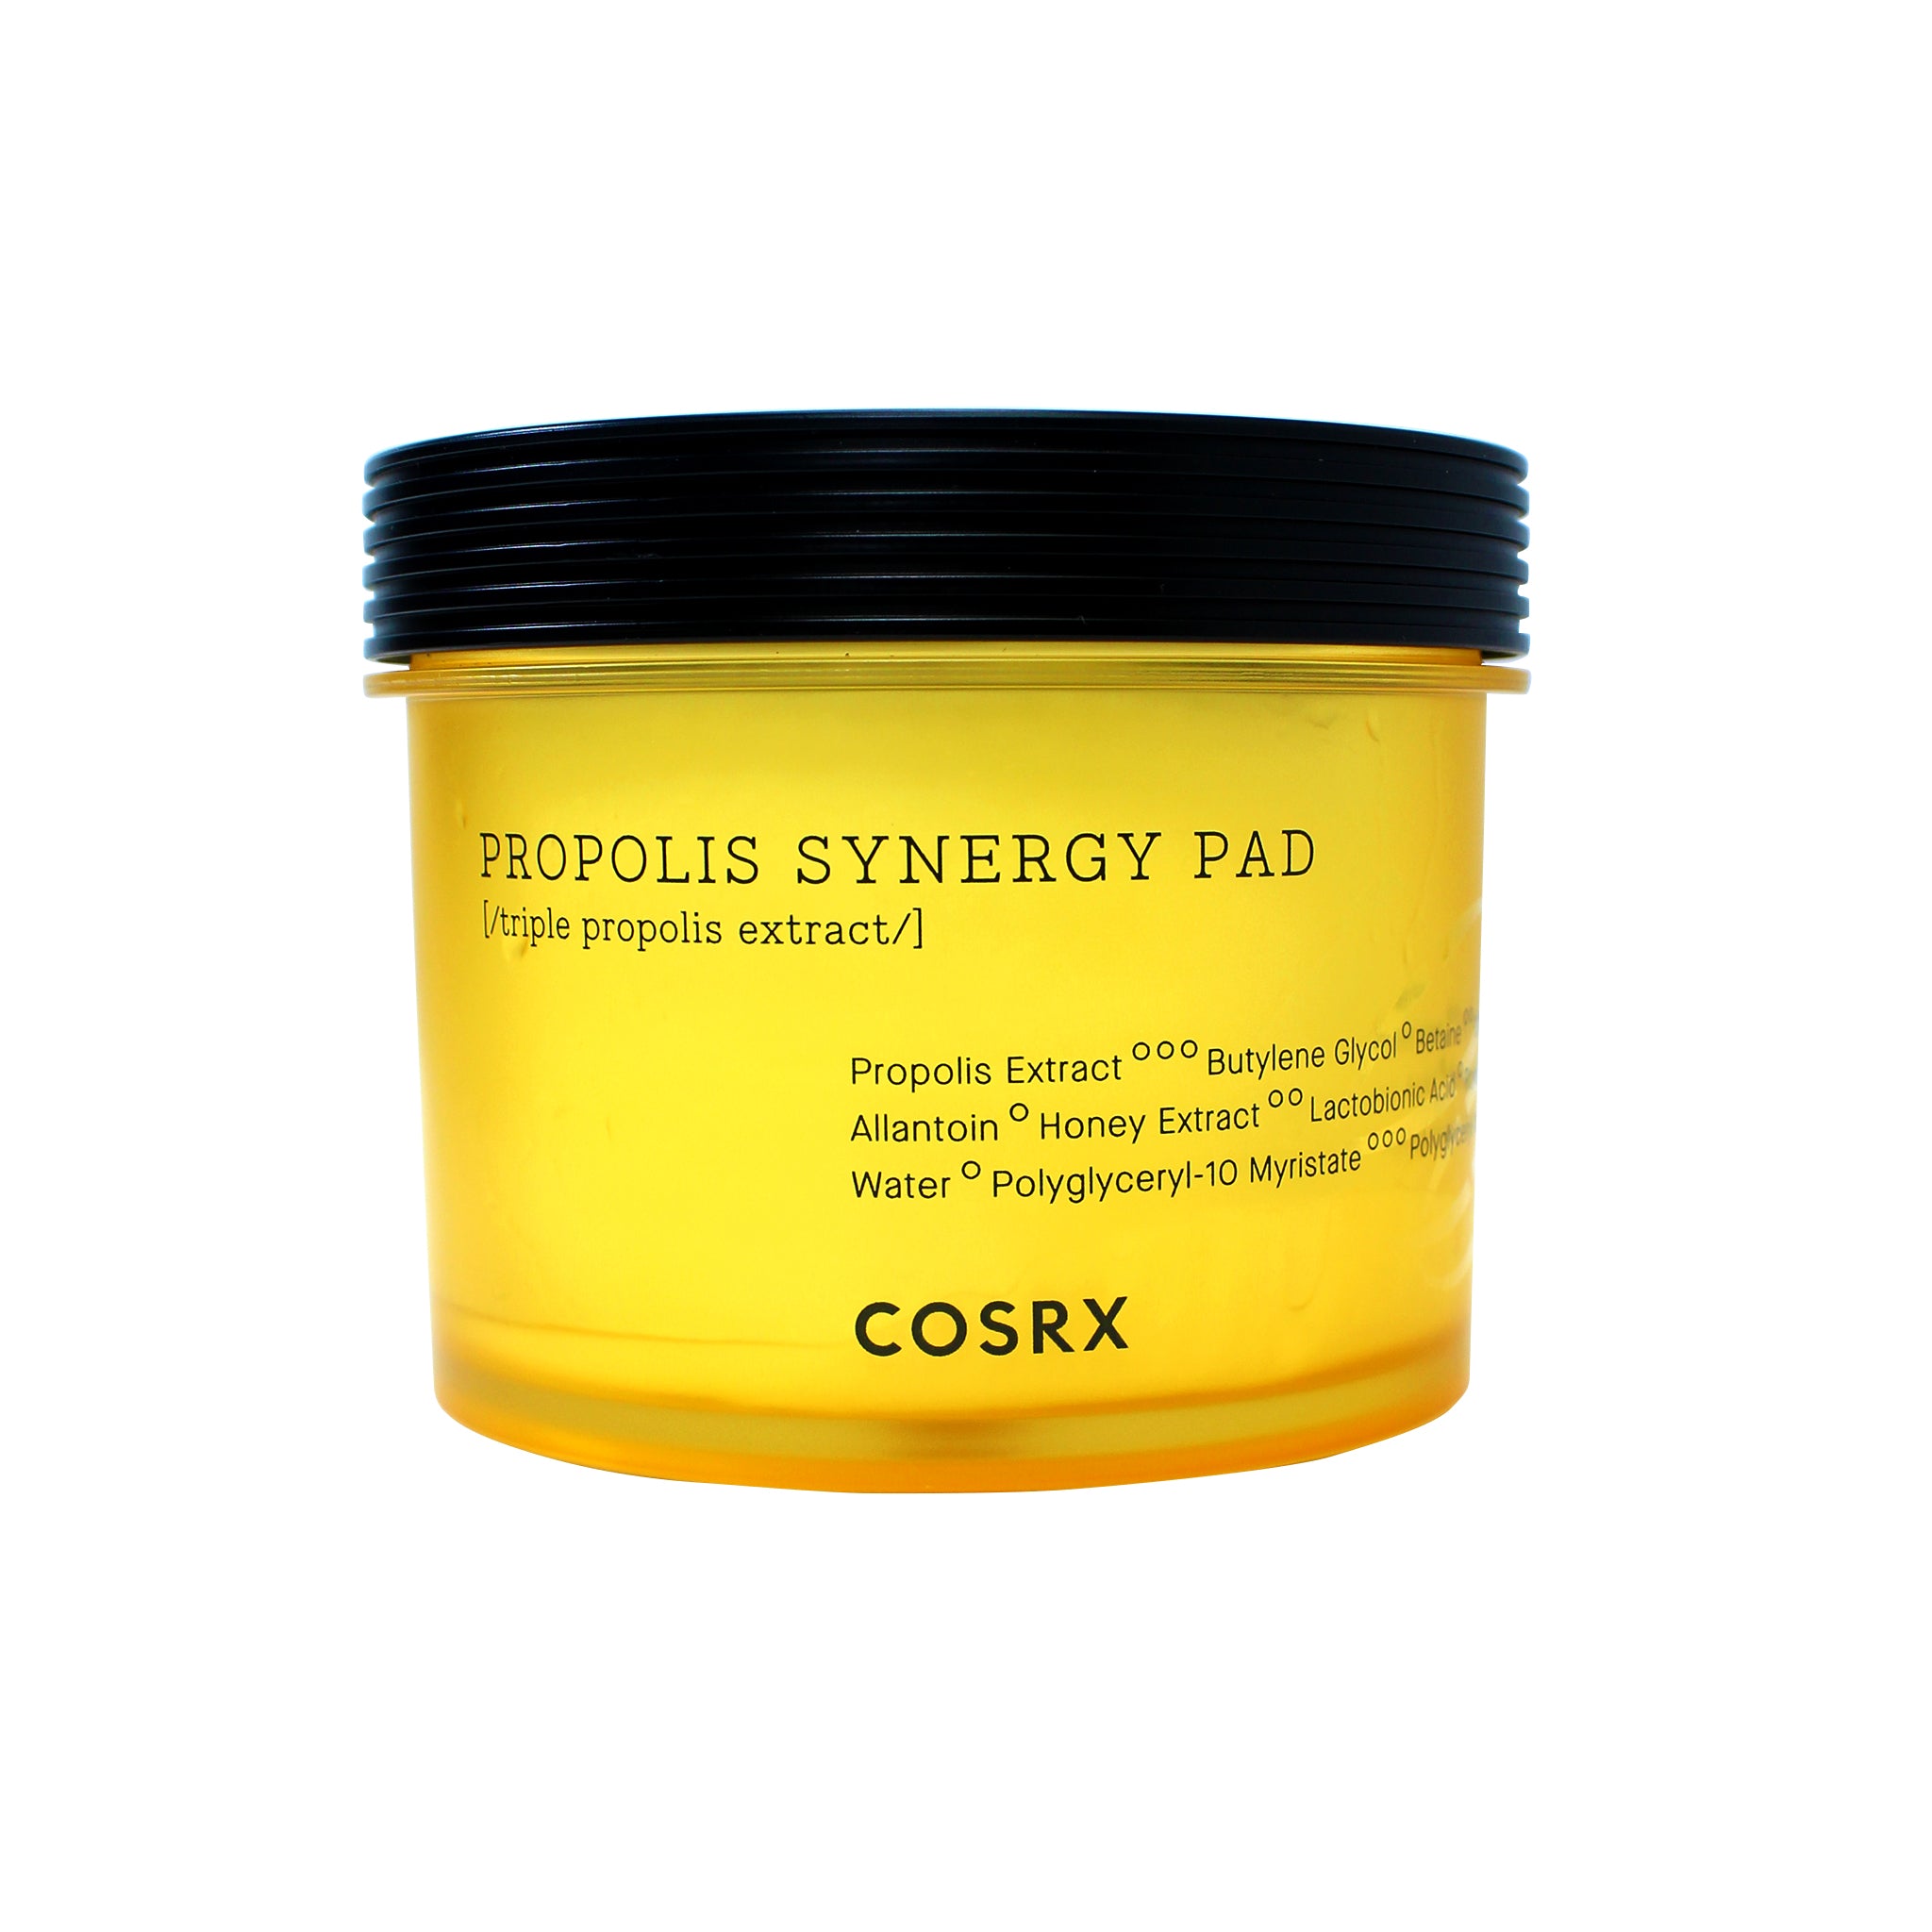 COSRX-Full Fit Propolis Synergy Pad